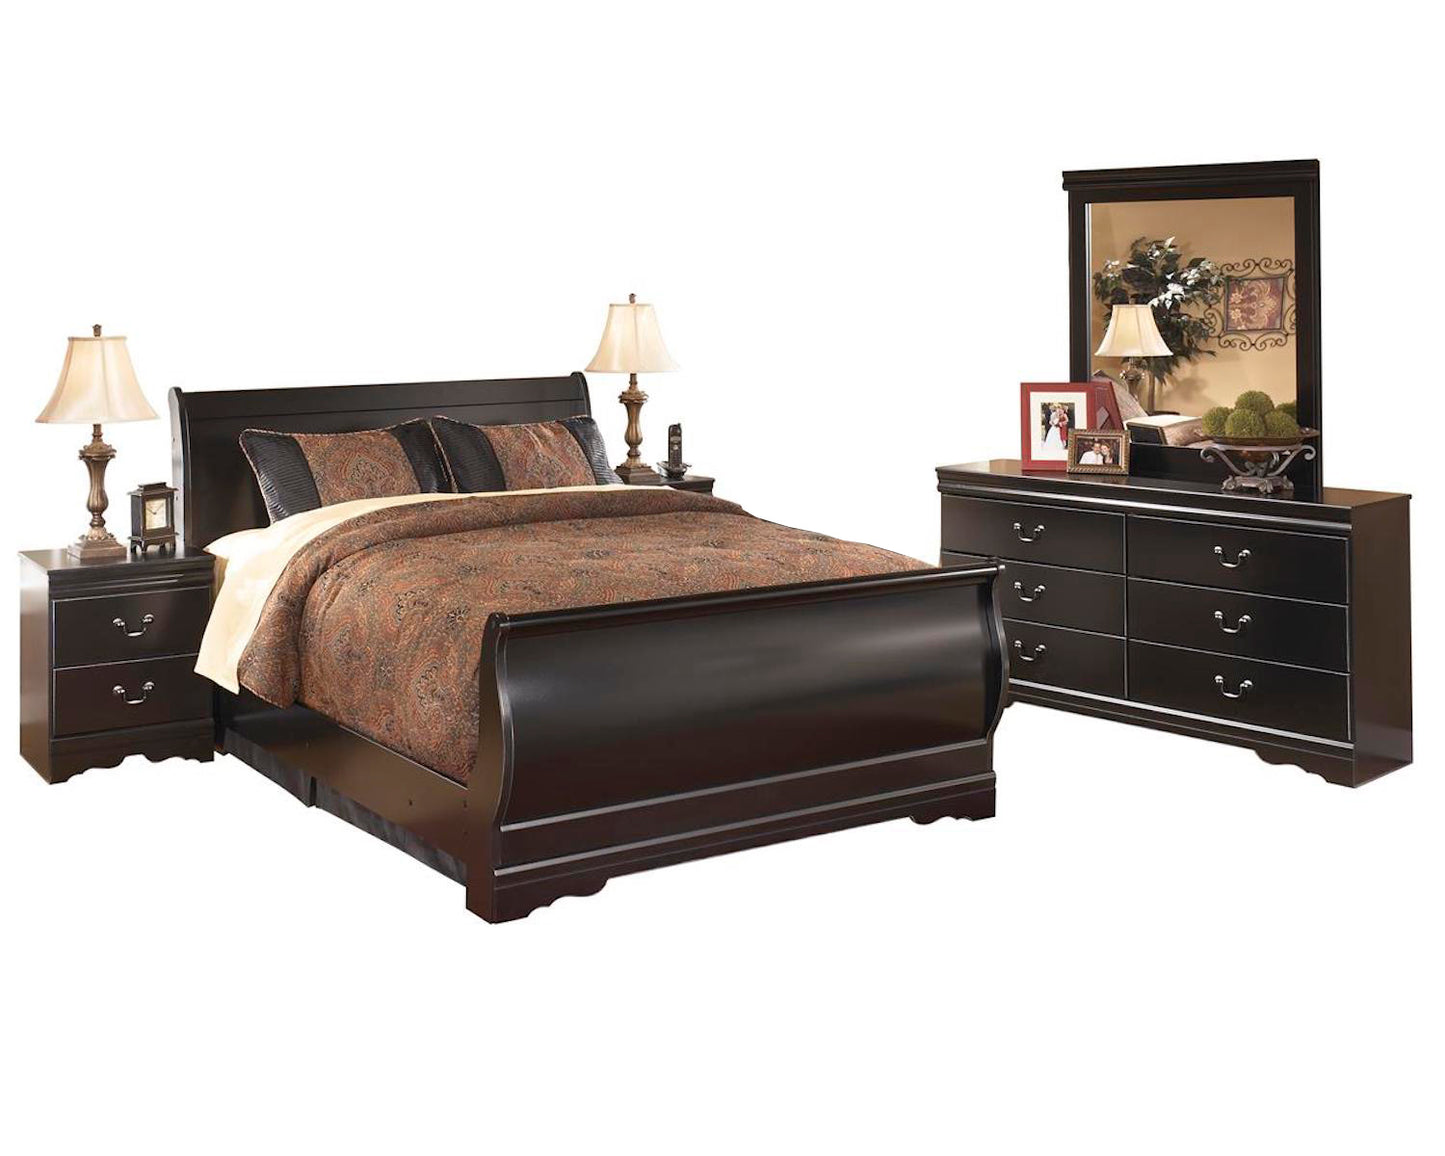 Ashley Huey Vineyard 5PC E King Sleigh Bedroom Set with two Nightstands In Black